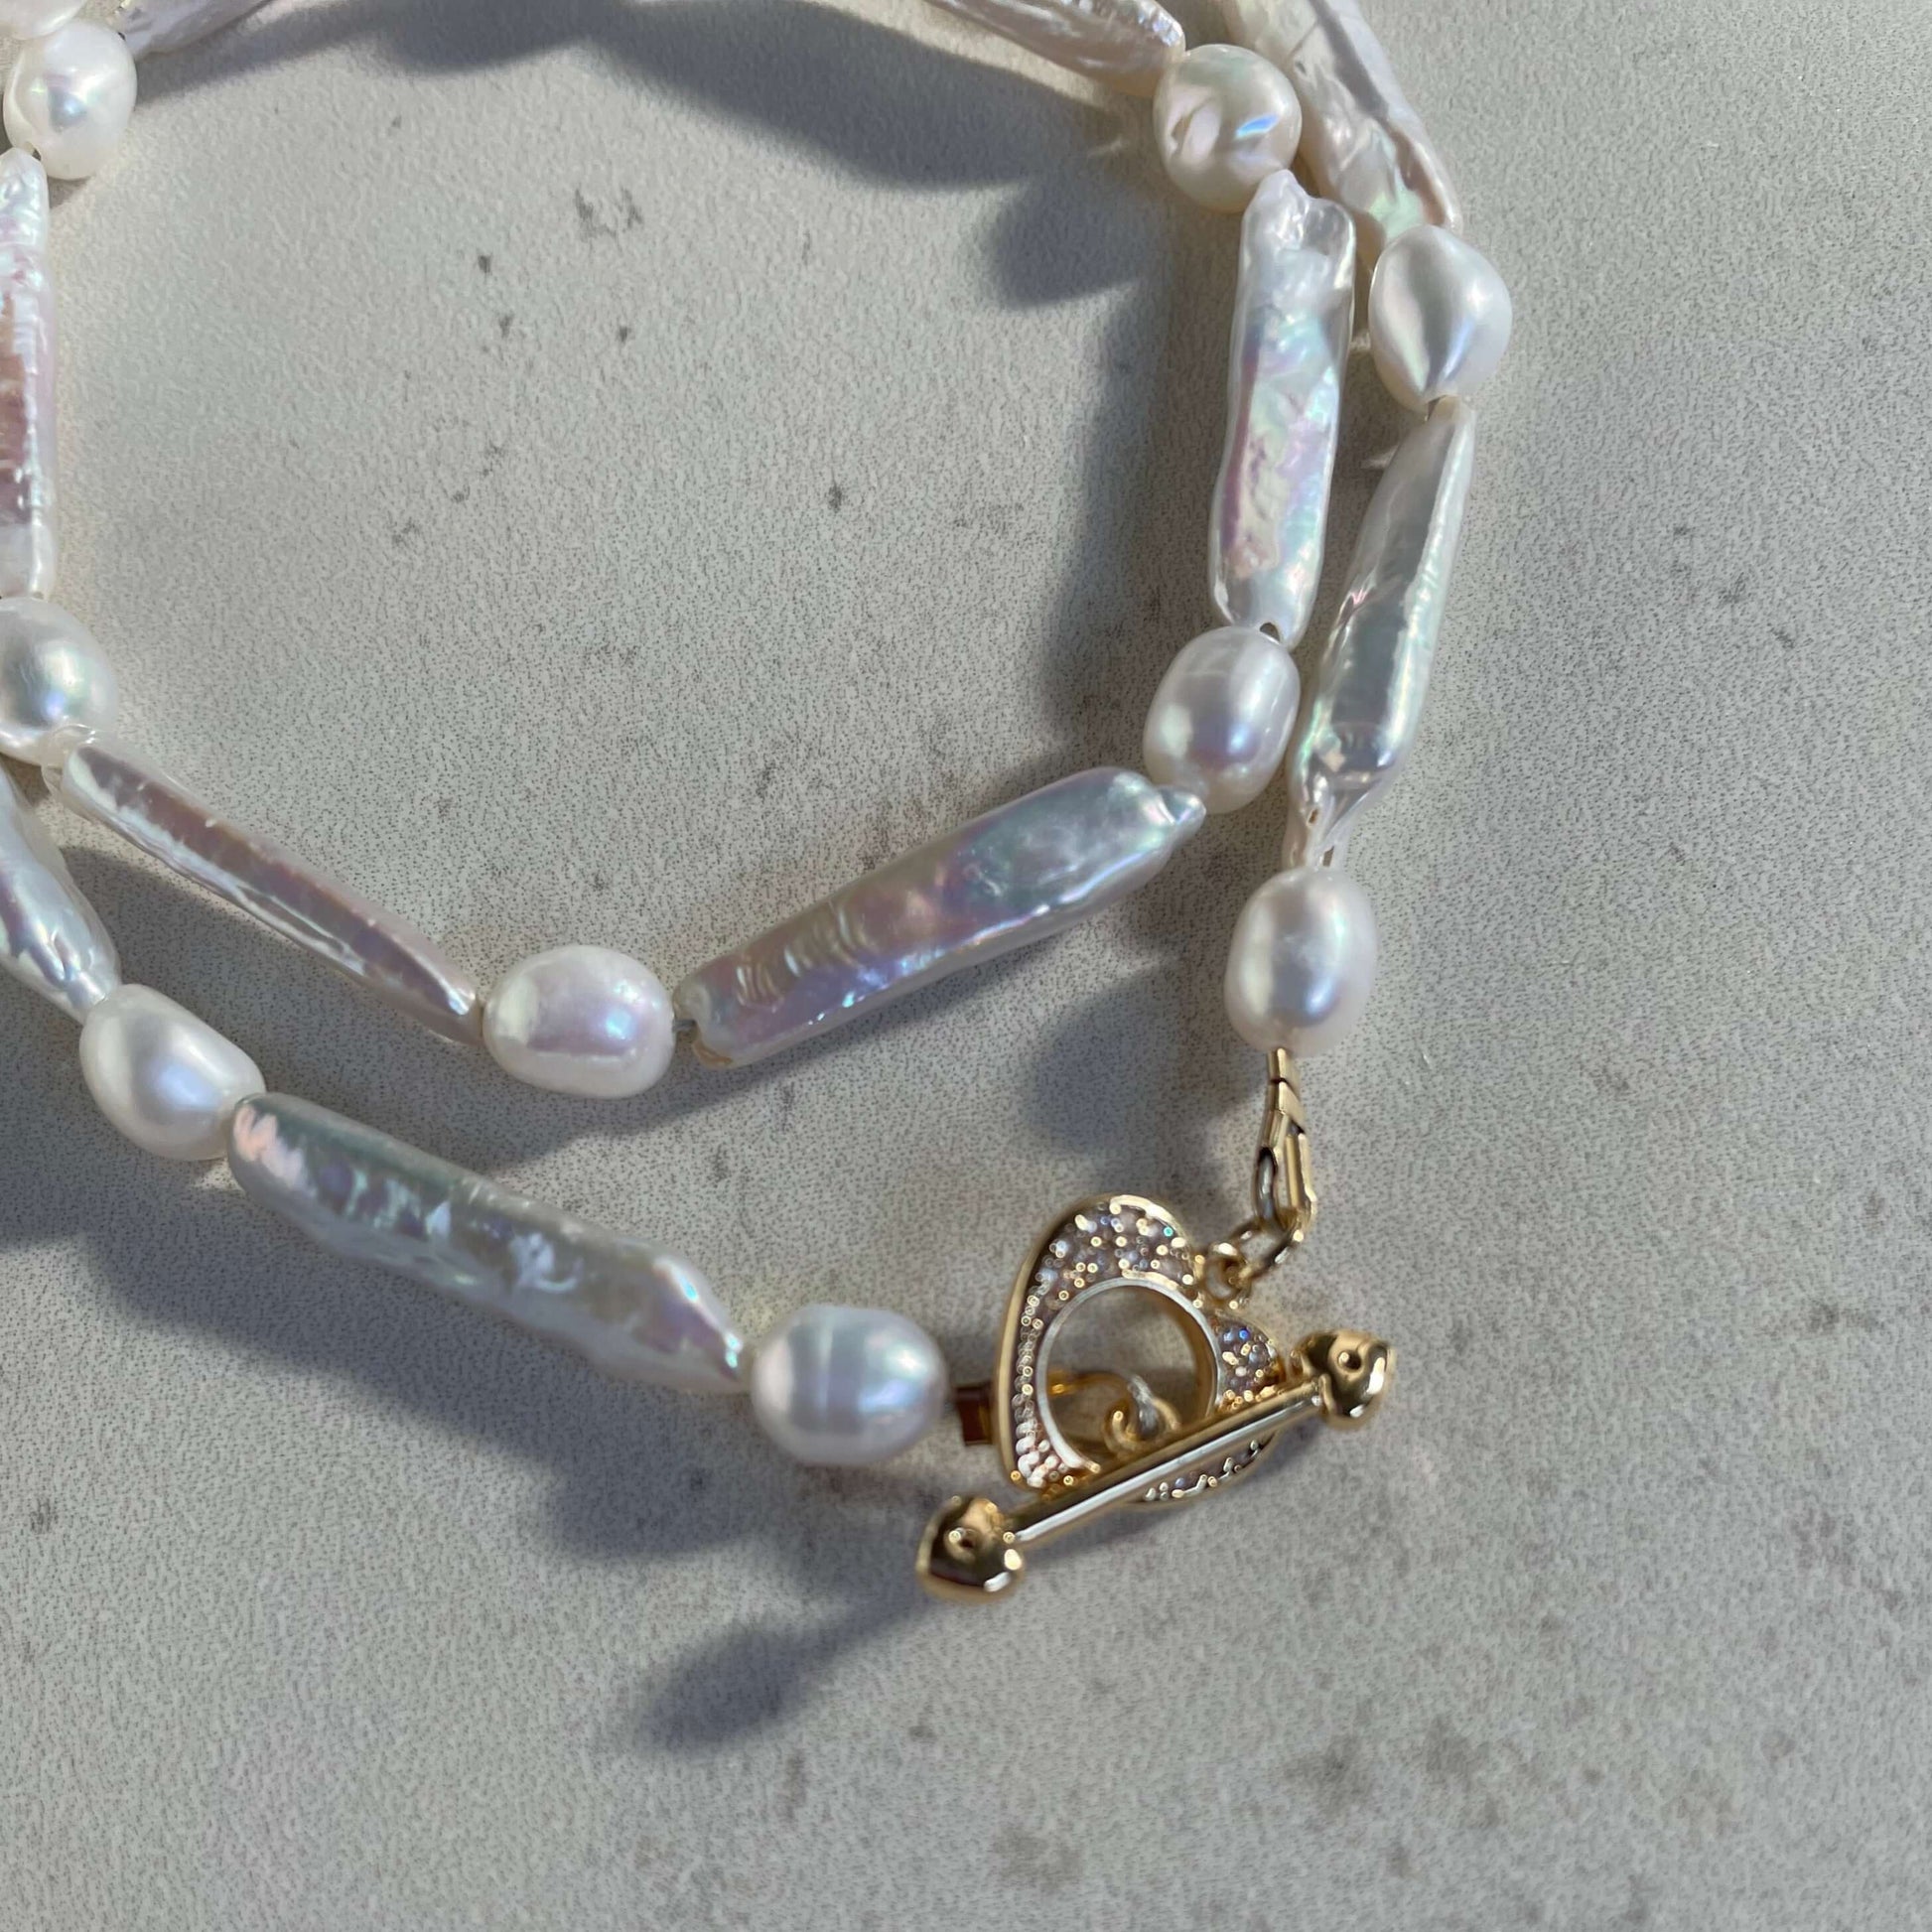 a close up look of a pearl necklace with heart toggle clasp.